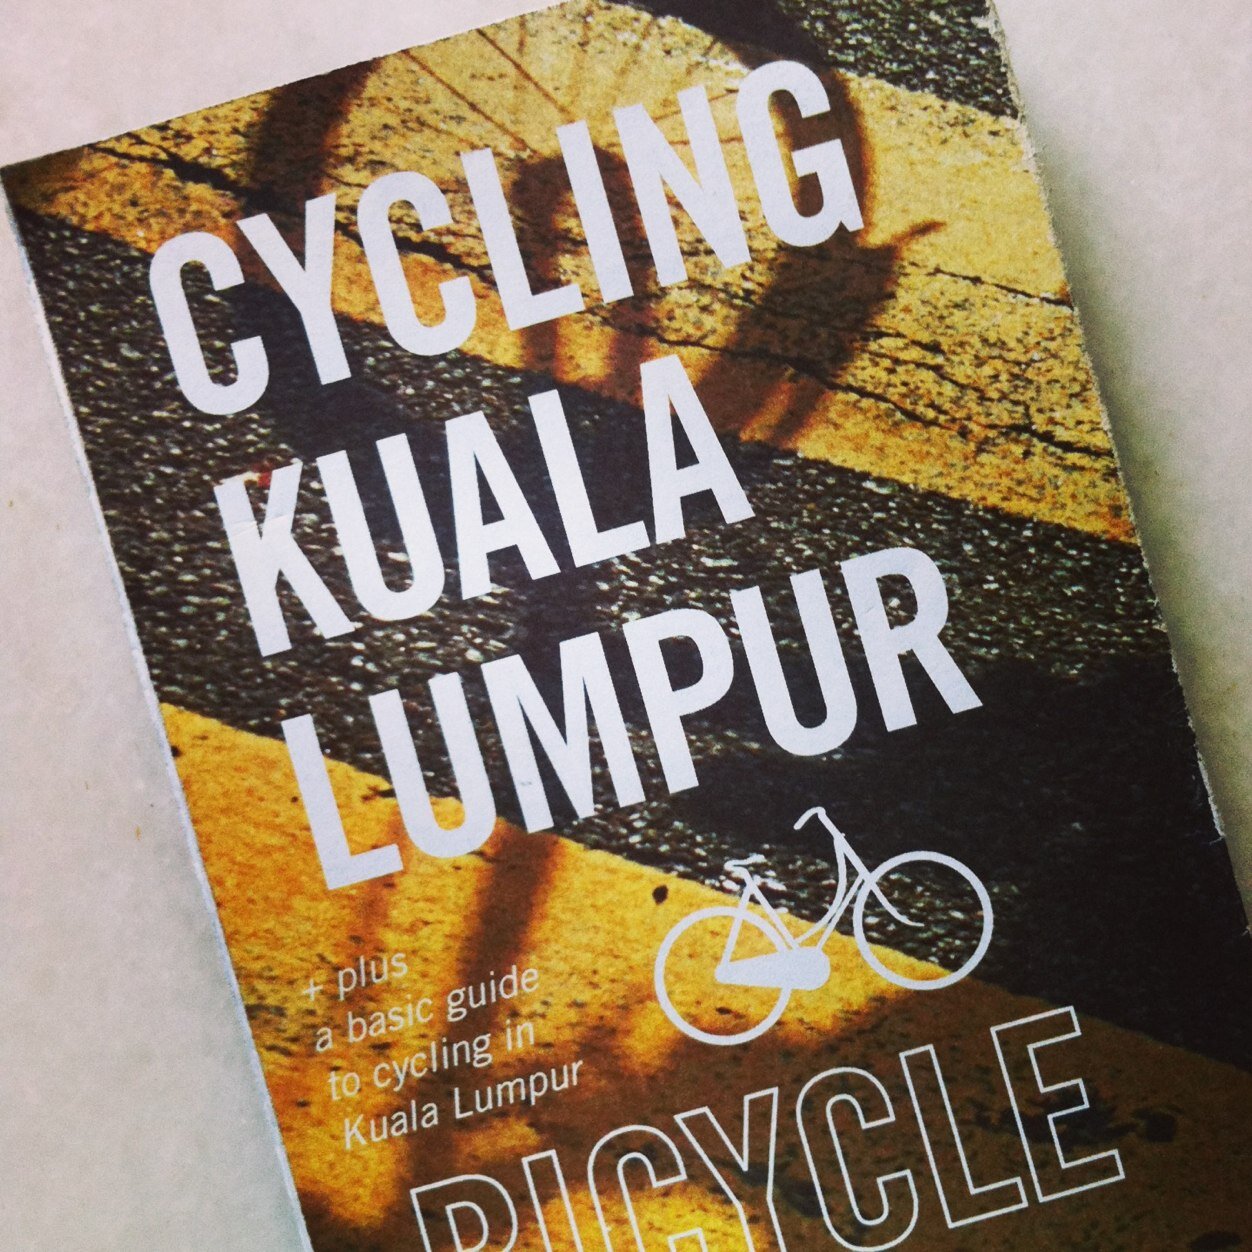 Cycling Kuala Lumpur, Bicycle Map Project; an independent design & cycling initiative. A cycling guide map for getting around KL #cyclingkualalumpur @cyclingkl